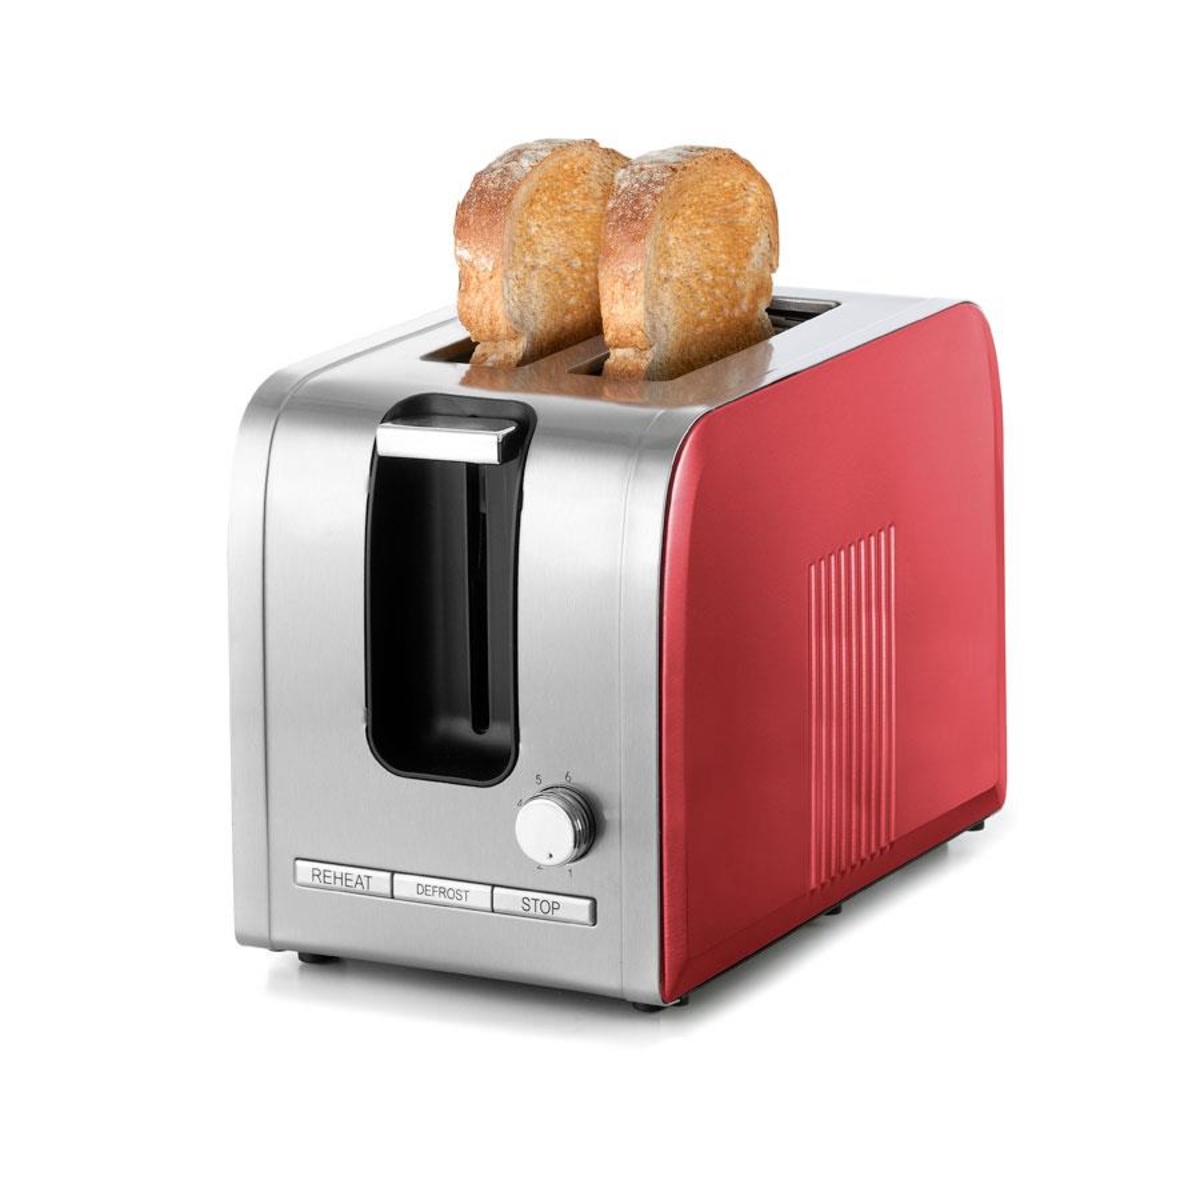 2 Slice Stainless Steel Toaster - Red